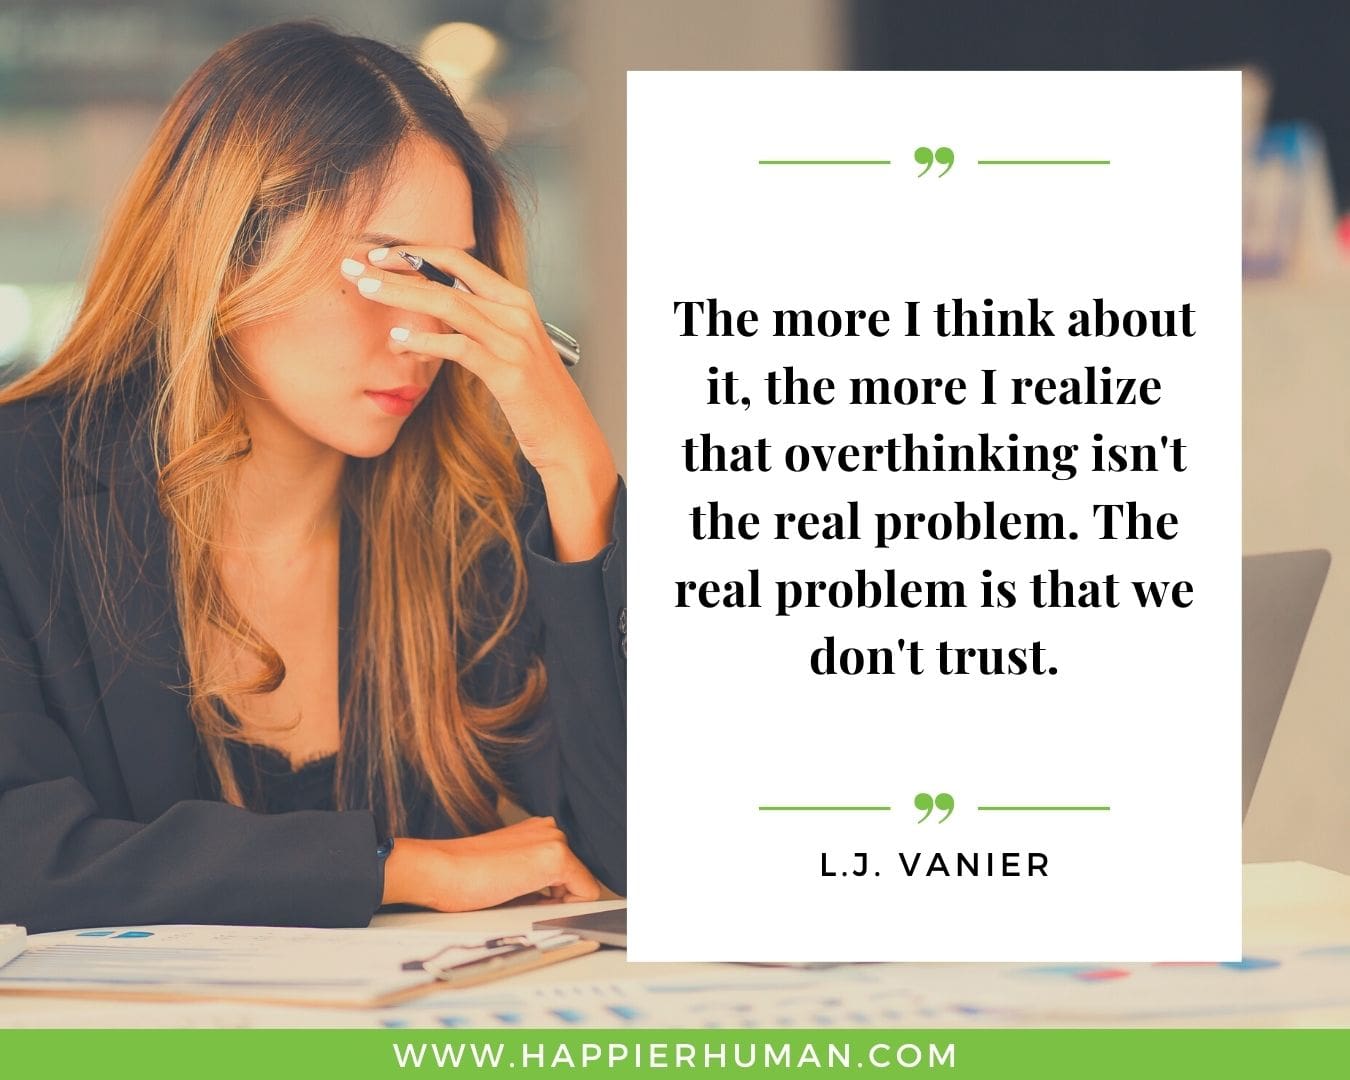 Overthinking Quotes - “The more I think about it, the more I realize that overthinking isn't the real problem. The real problem is that we don't trust.” - L.J. Vanier